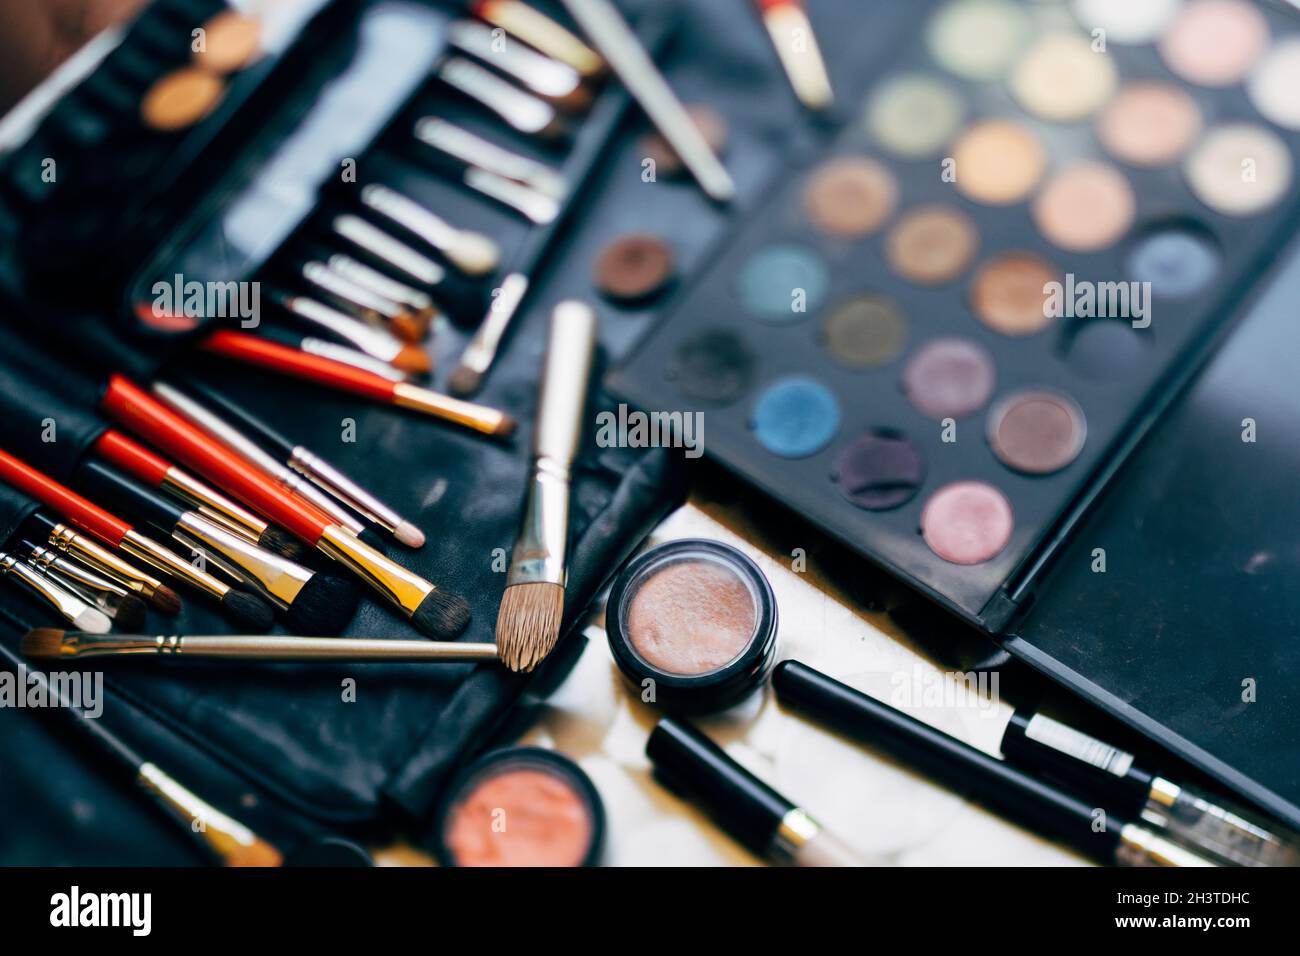 Makeup artist set. A palette of eyeshadows in different colors and a set of makeup brushes with blush in a black cosmetic bag. Stock Photo